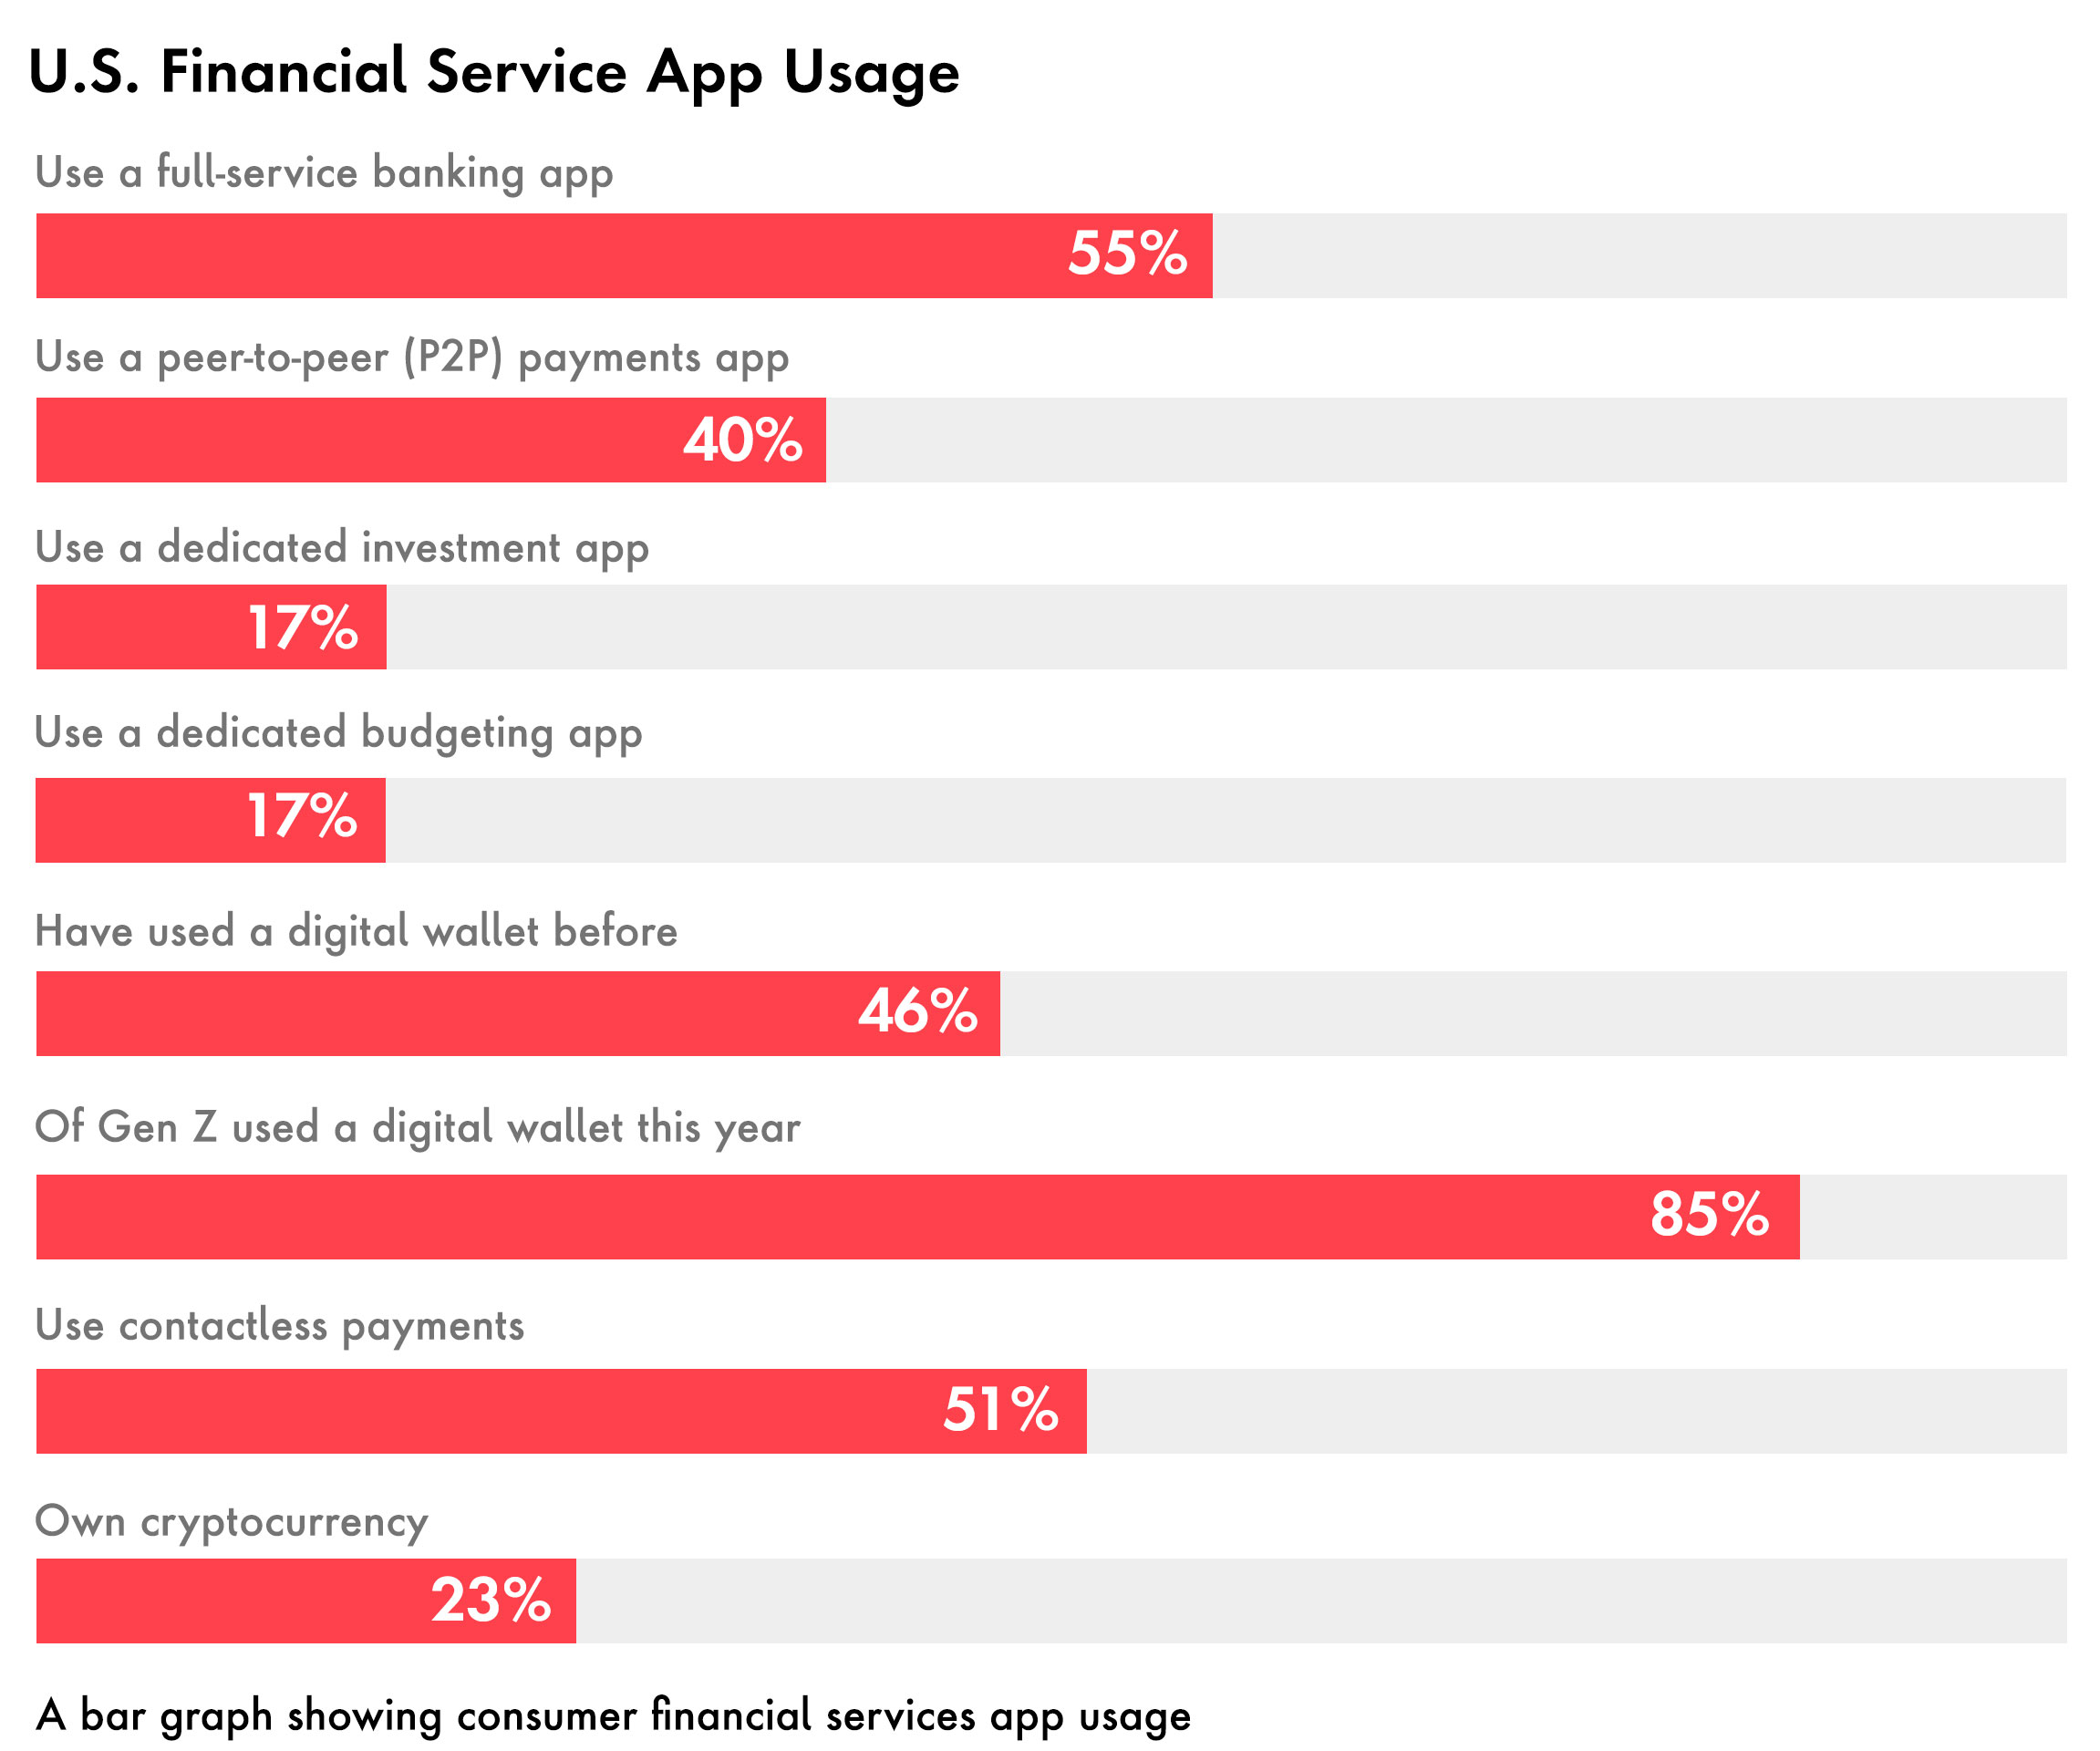 More than half of consumers are using a full-service banking app.